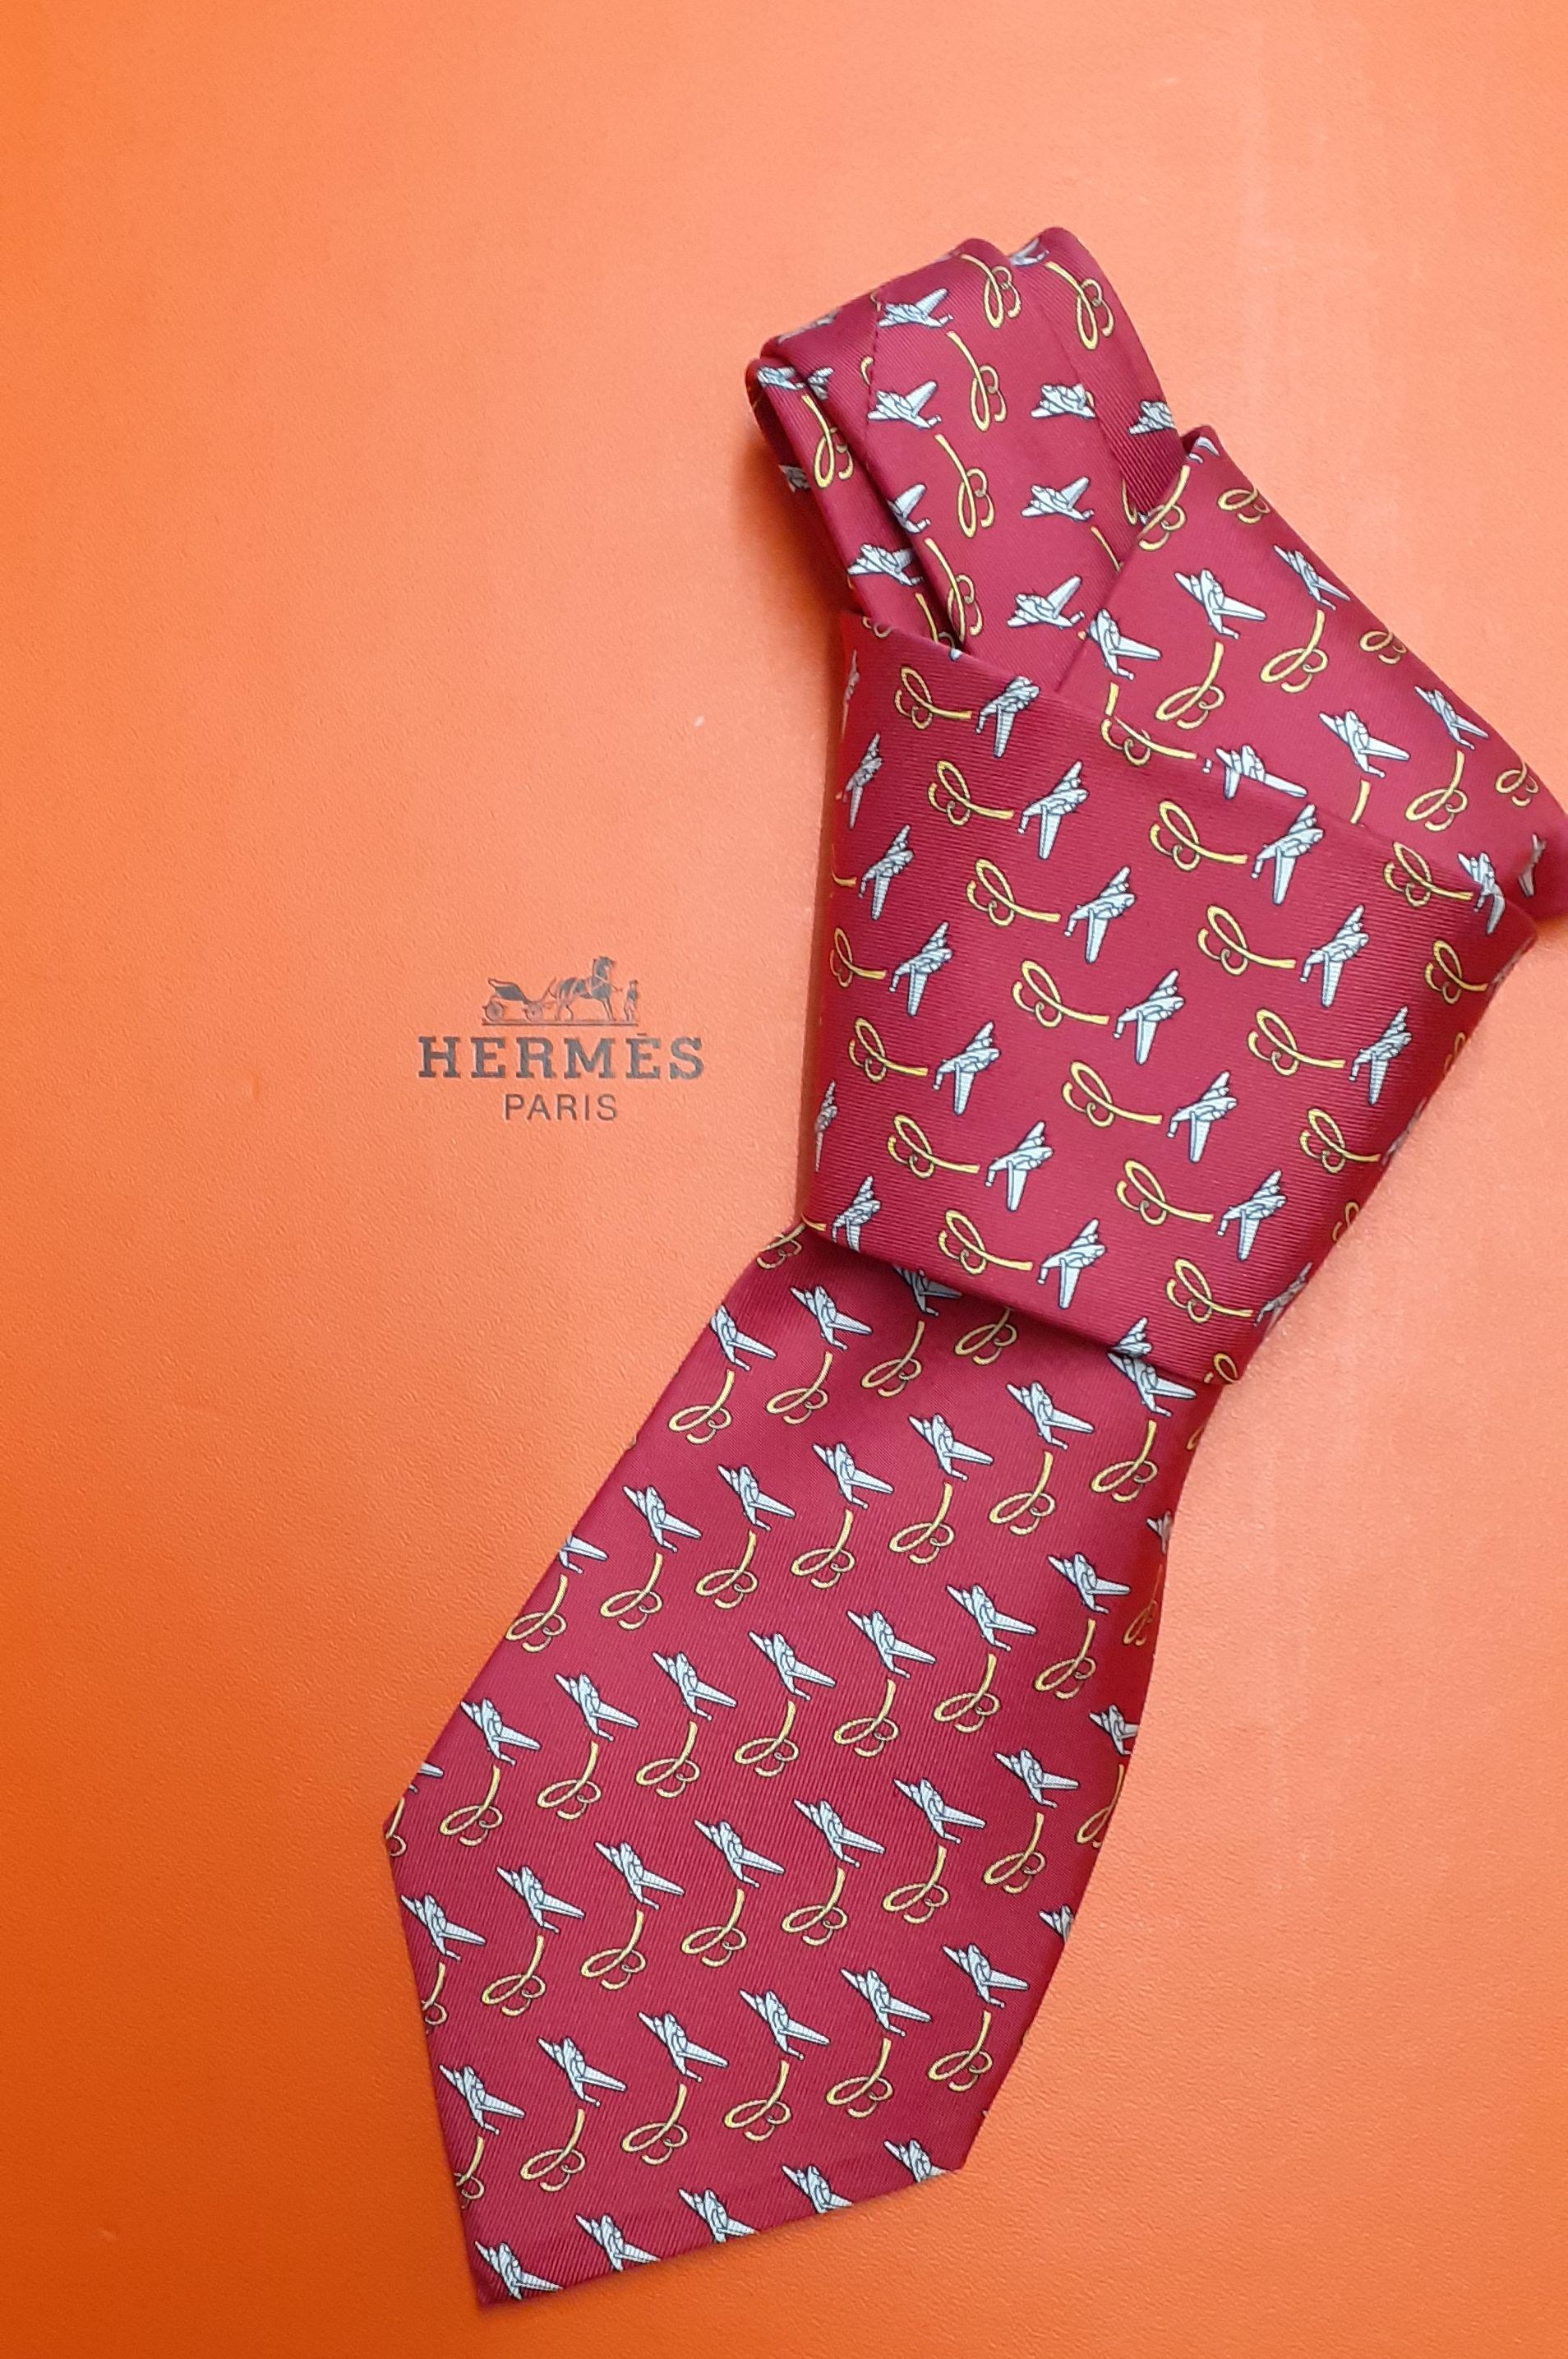 Rare Authentic Hermès Tie for Breitling

Print: Planes and the 